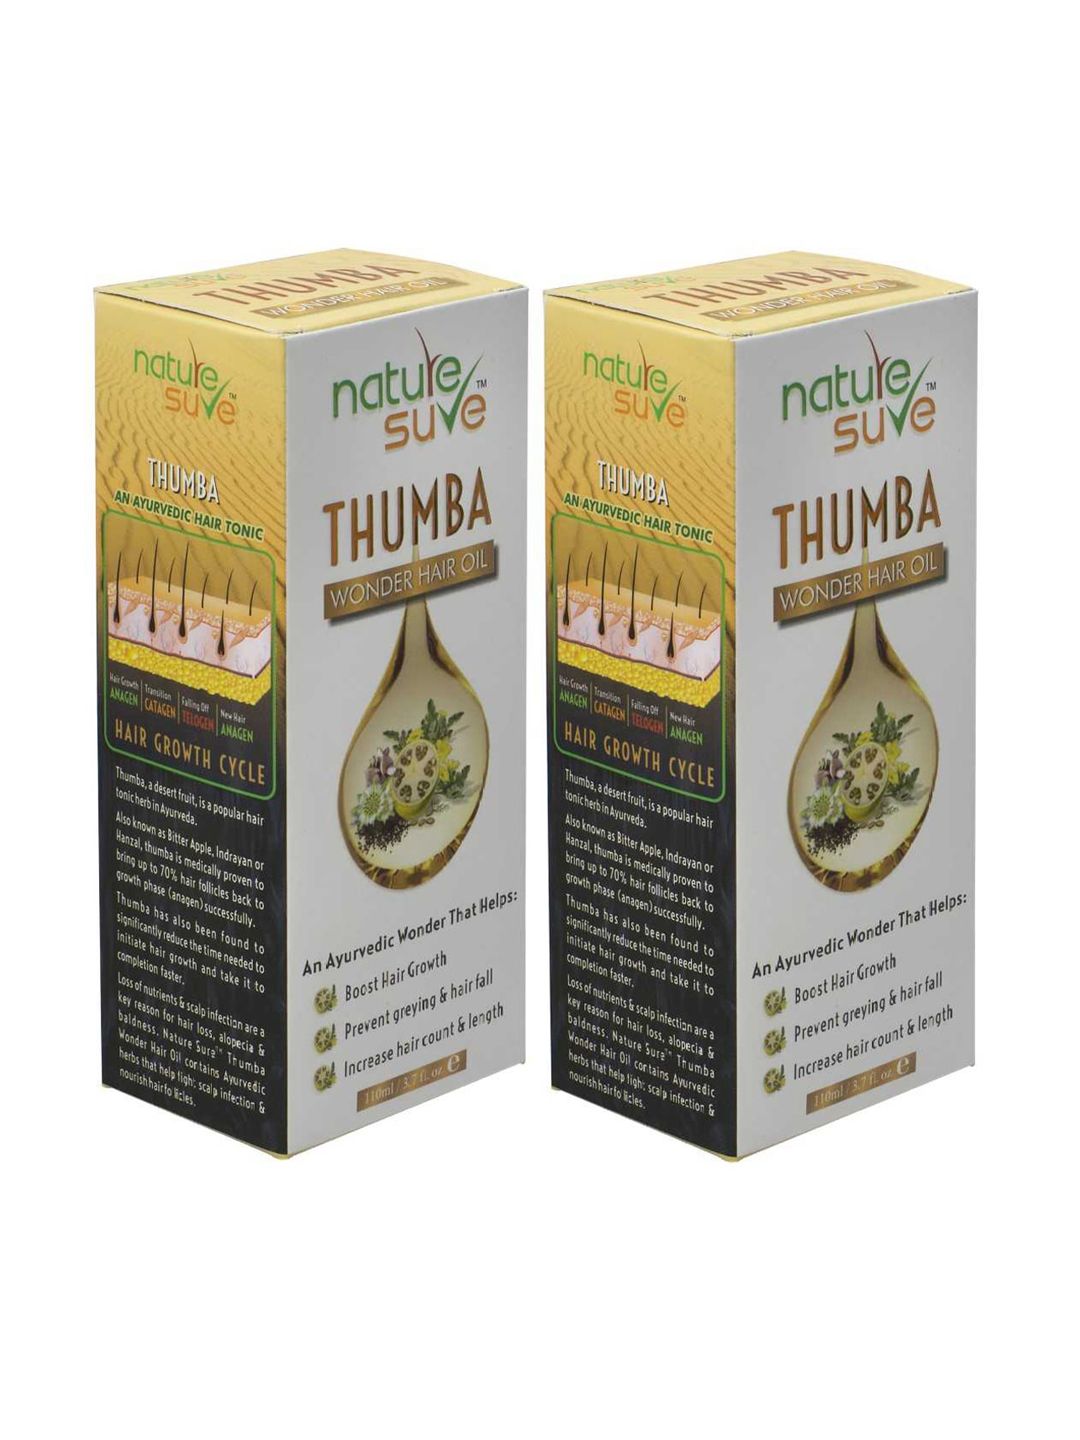 Nature Sure Set of 2 Thumba Wonder Hair Oil - 110 ml each Price in India